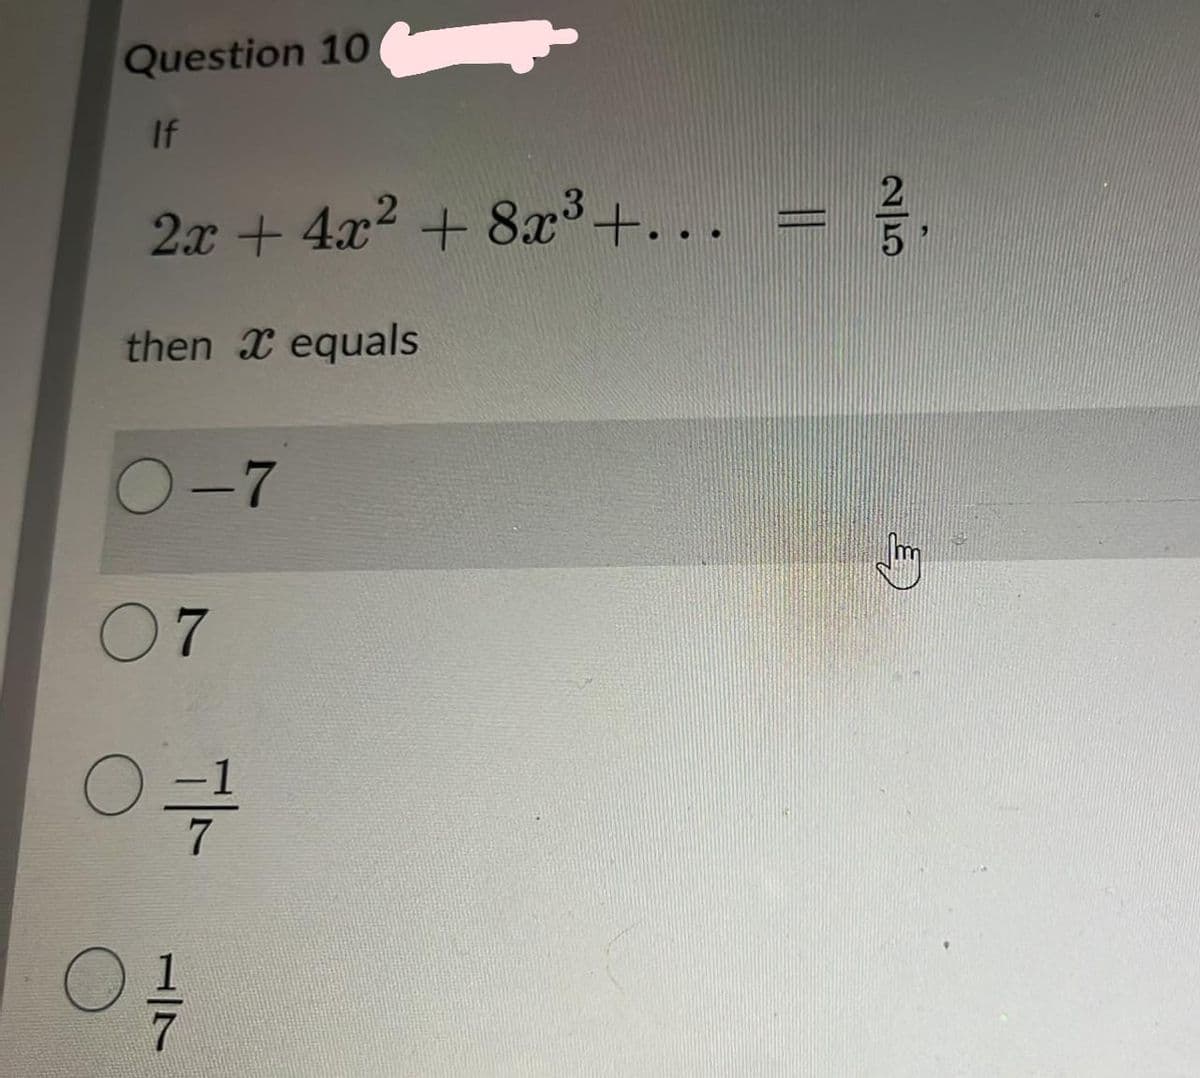 Question 10
If
2x + 4x2 + 8x³+...
then X equals
O-7
07
7/-
1/7
